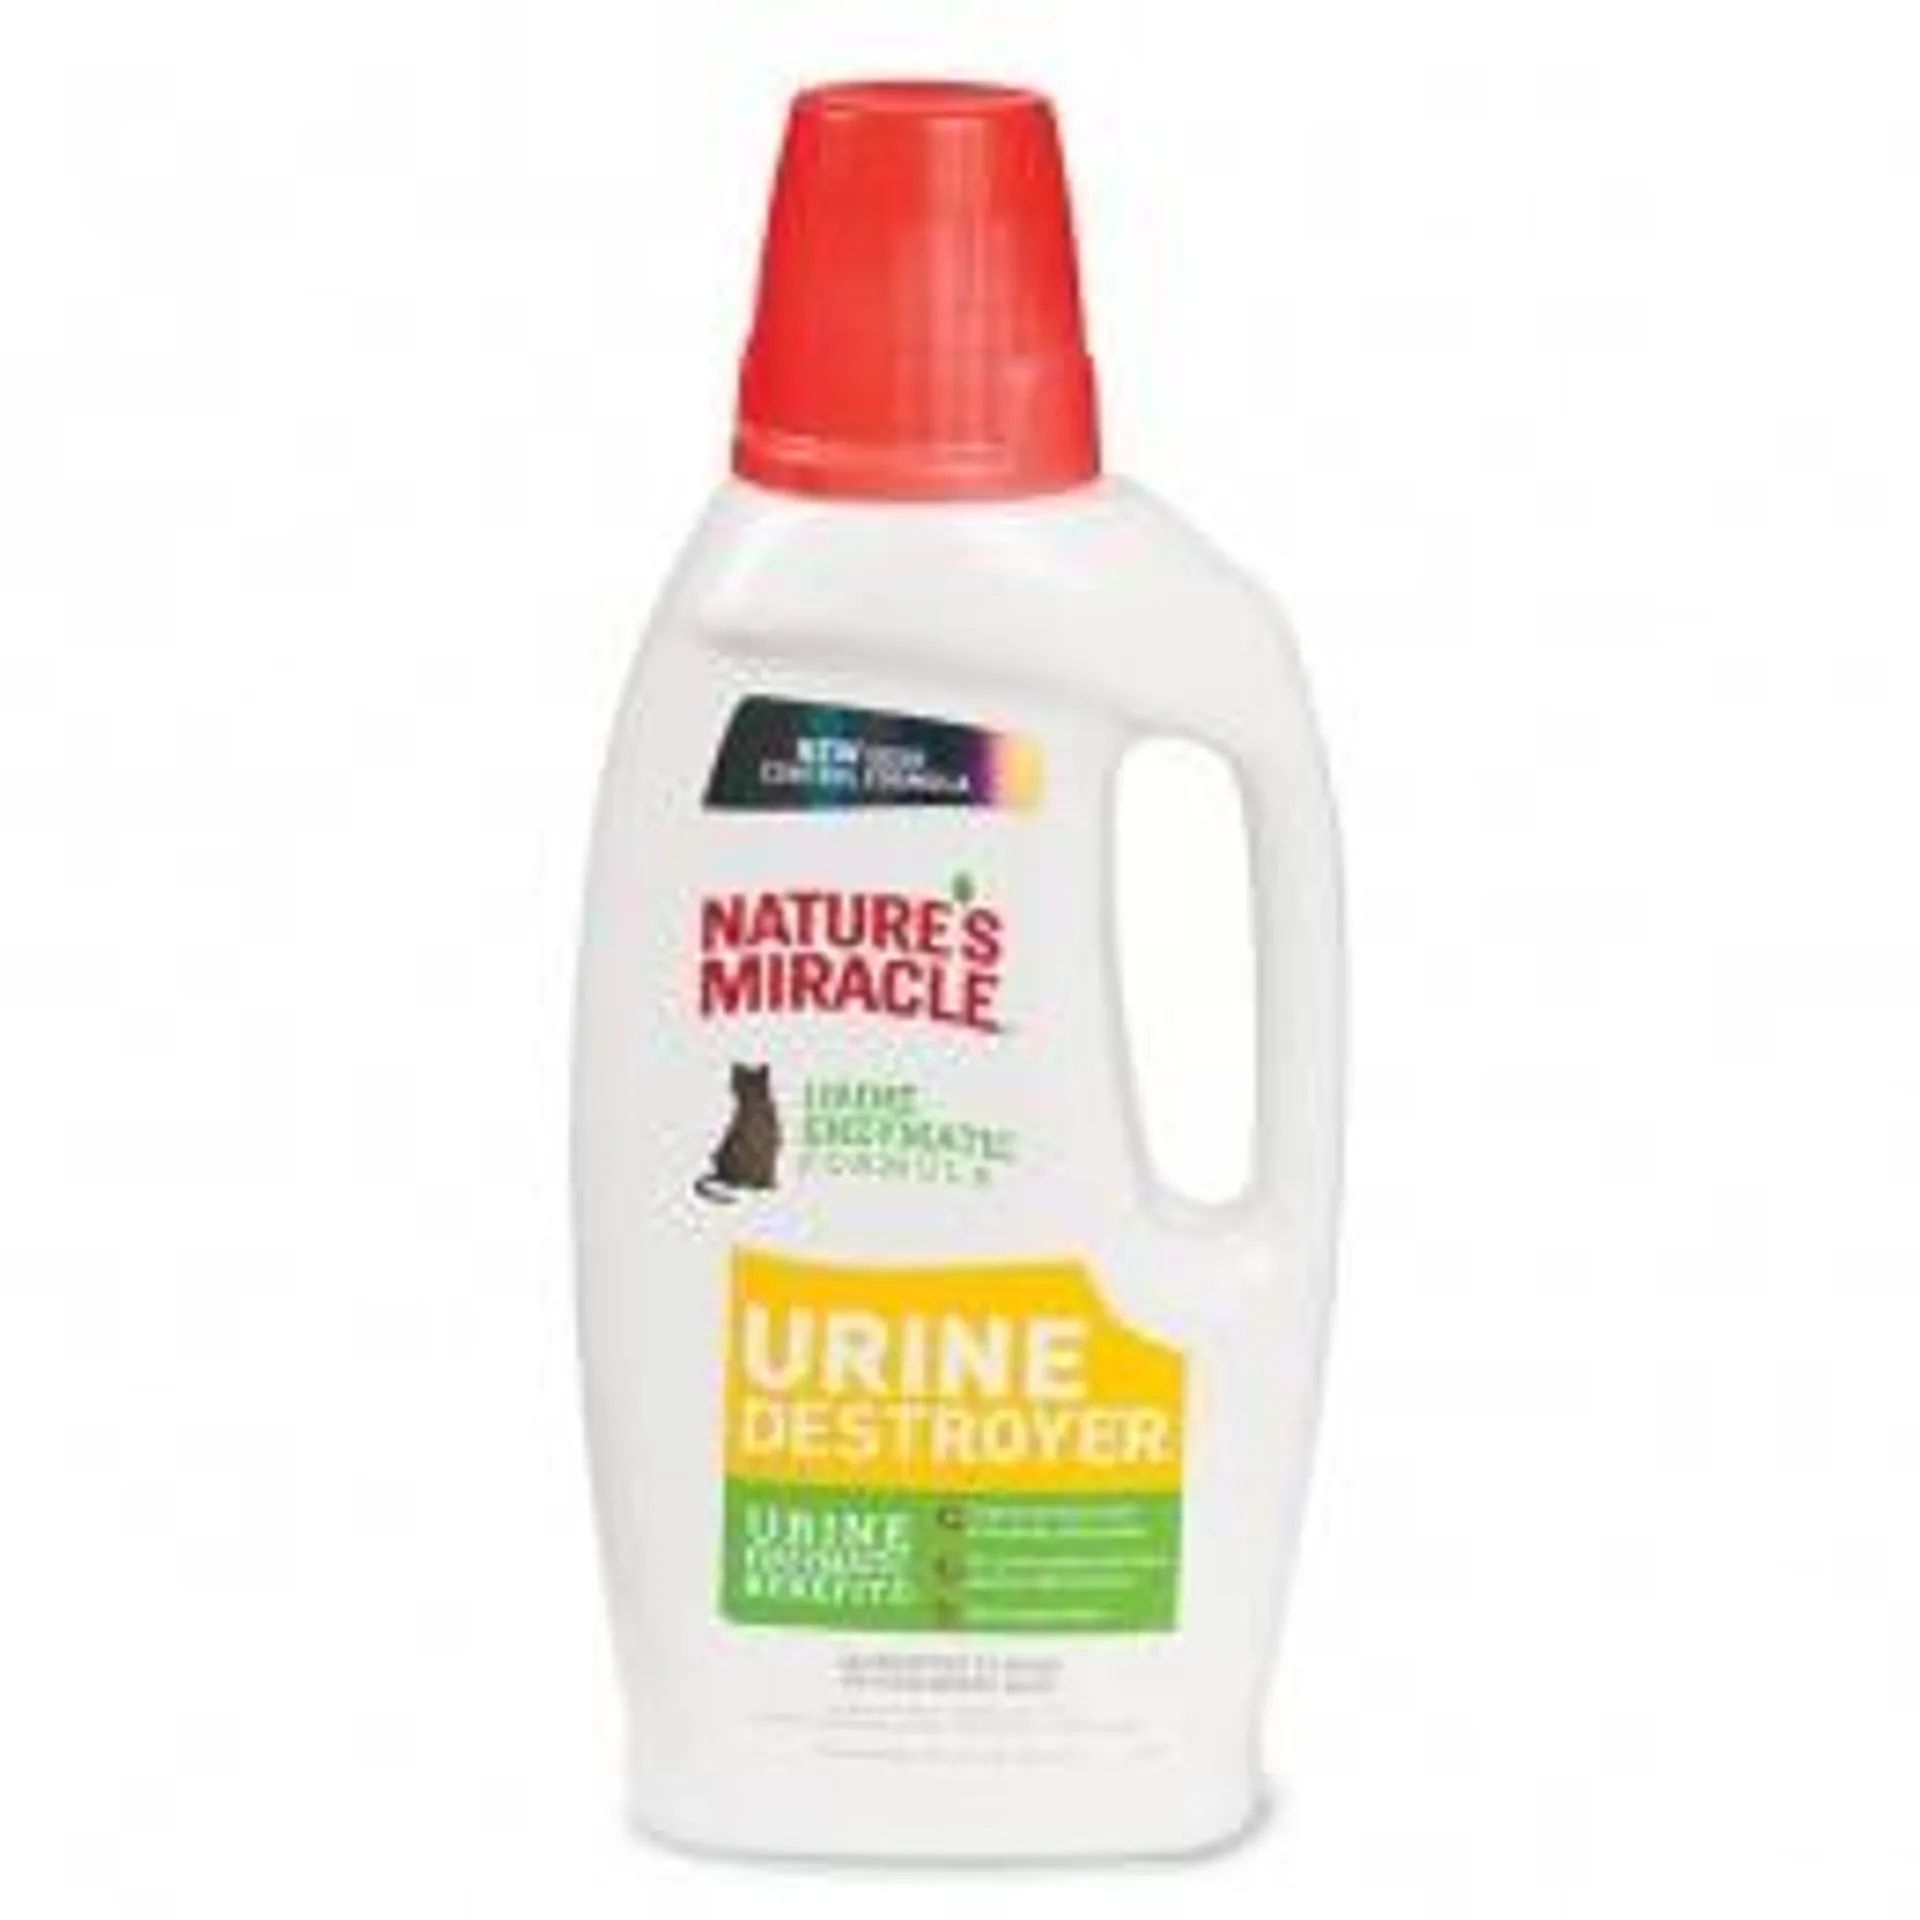 NATURES MIRACLE URINE DESTROYER GATO 946 ML